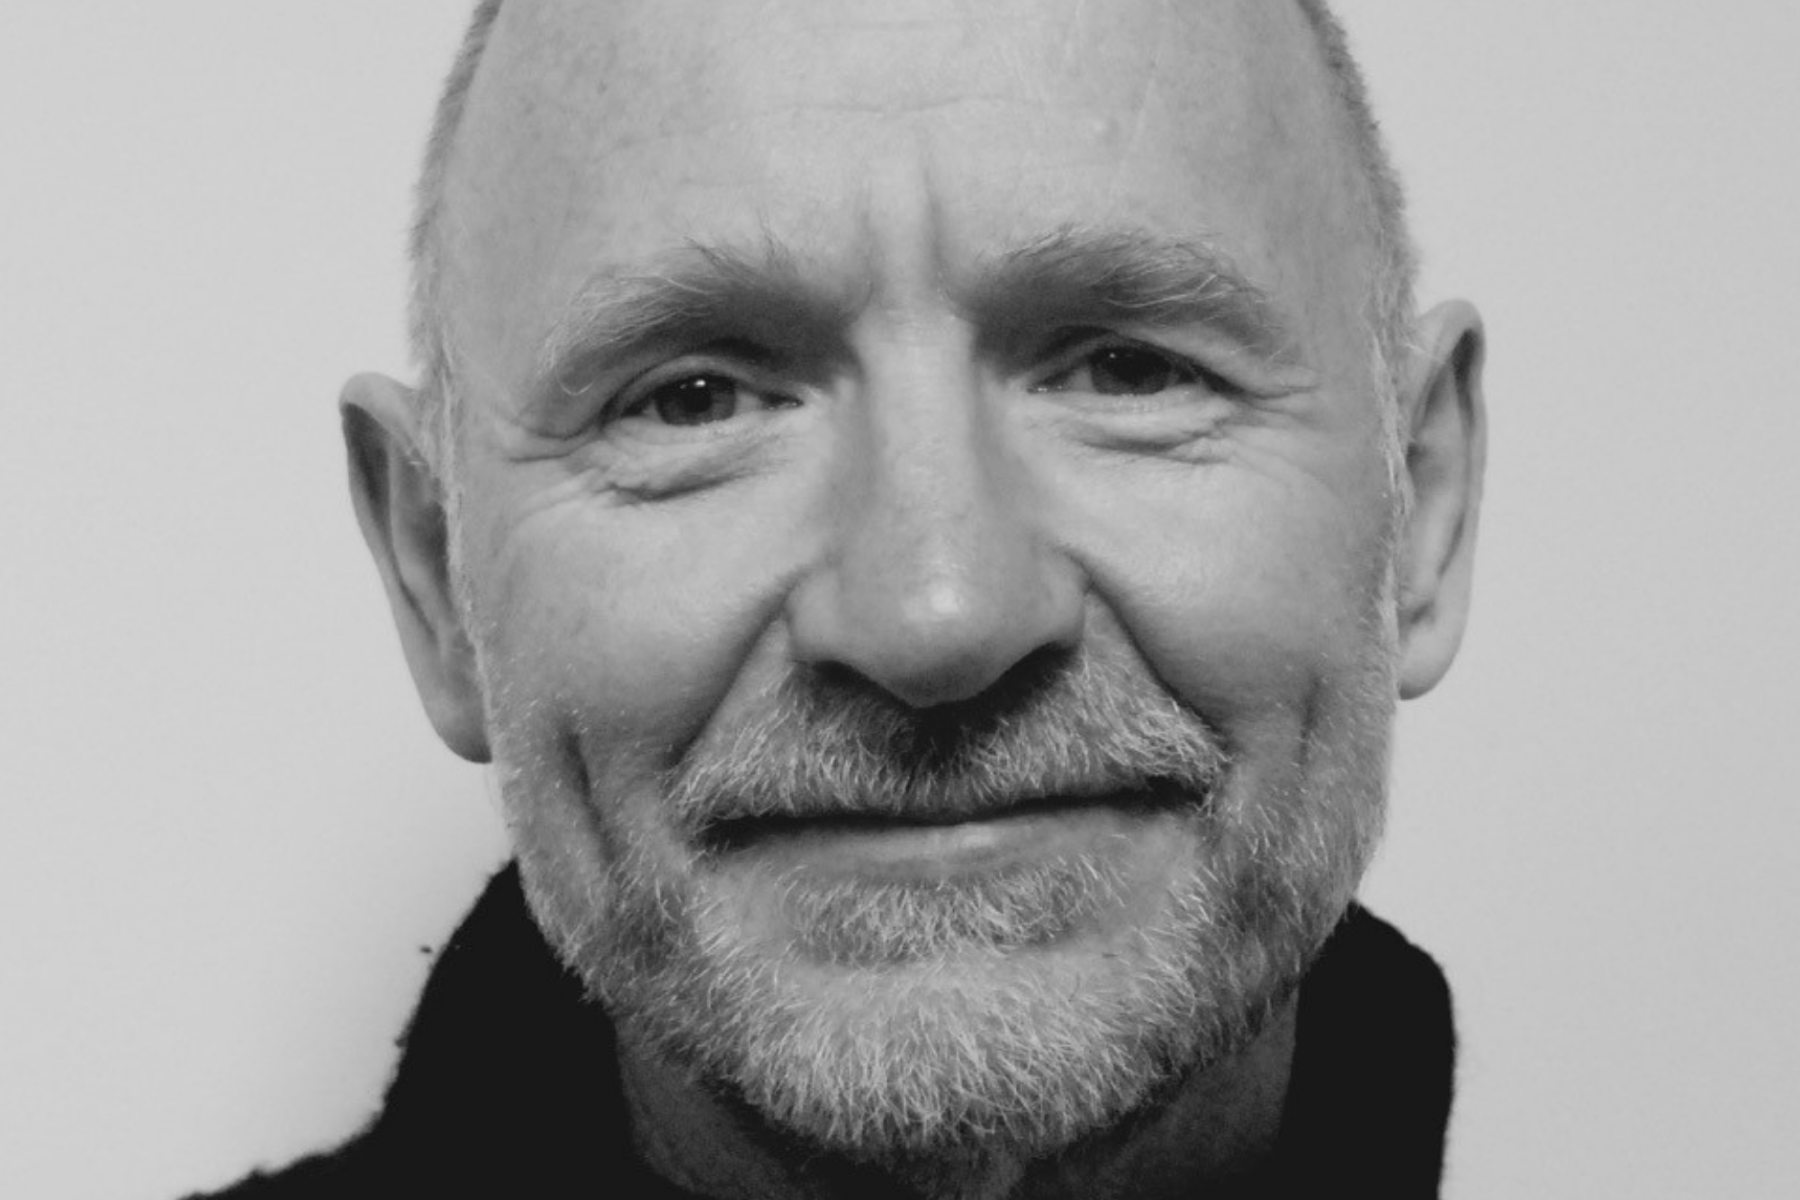 A photo of Scottish author and poet James Robertson, close up, in grayscale